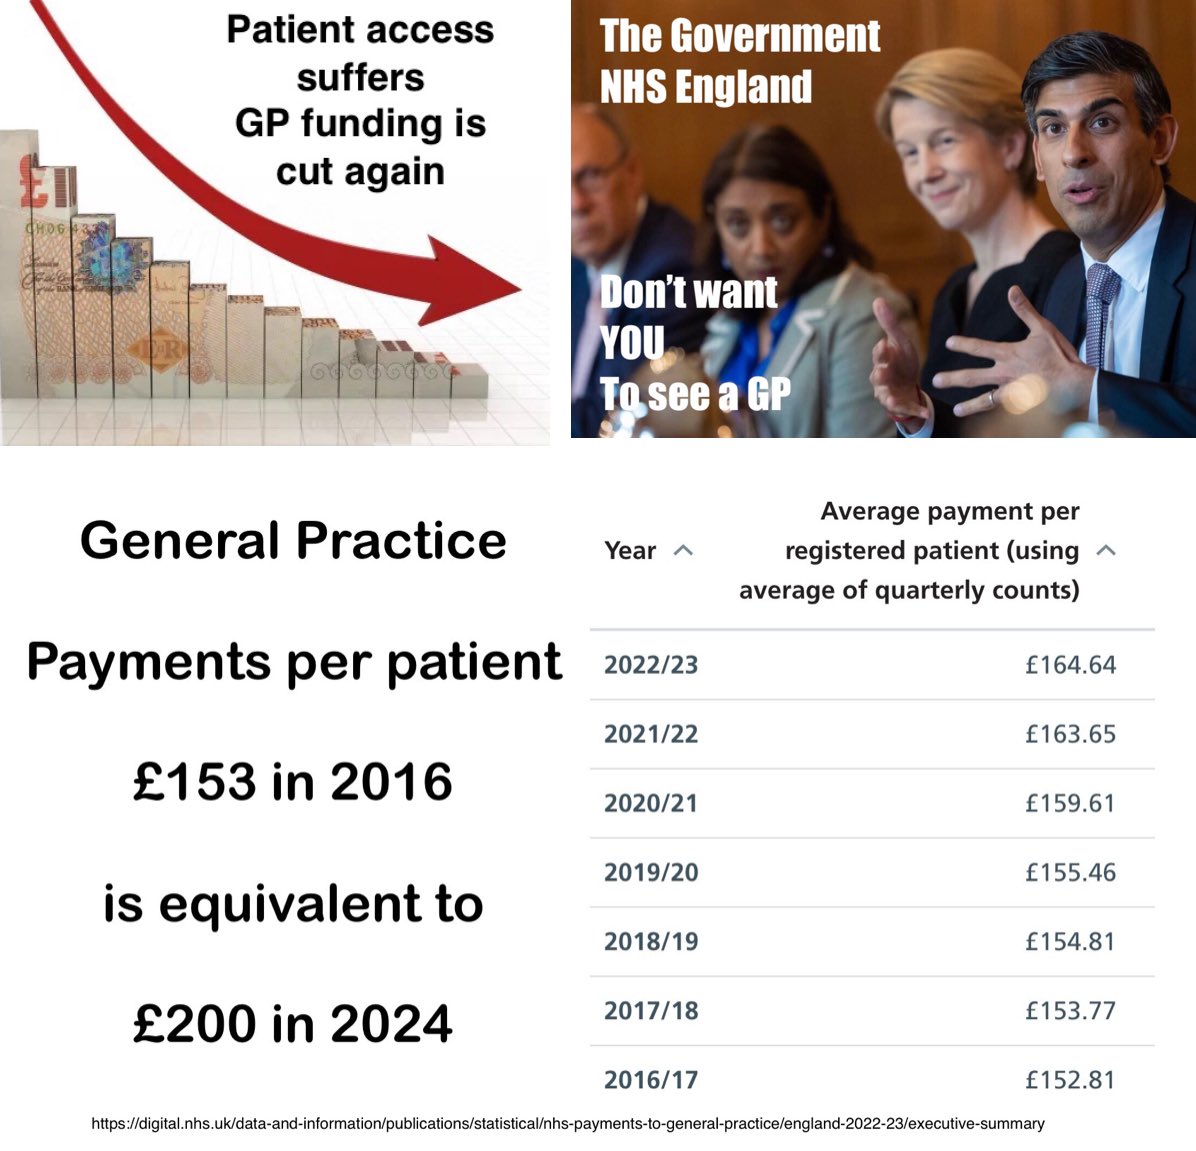 Pharmacy First should have been an additional service whilst funding GP practices to provide more Although Pharmacies need extra funding this fails to be a joined up approach to patient care Robbing one service to pay another £600m Pharmacy 1st, £1.4bn ARRS, with a cut GP £2bn